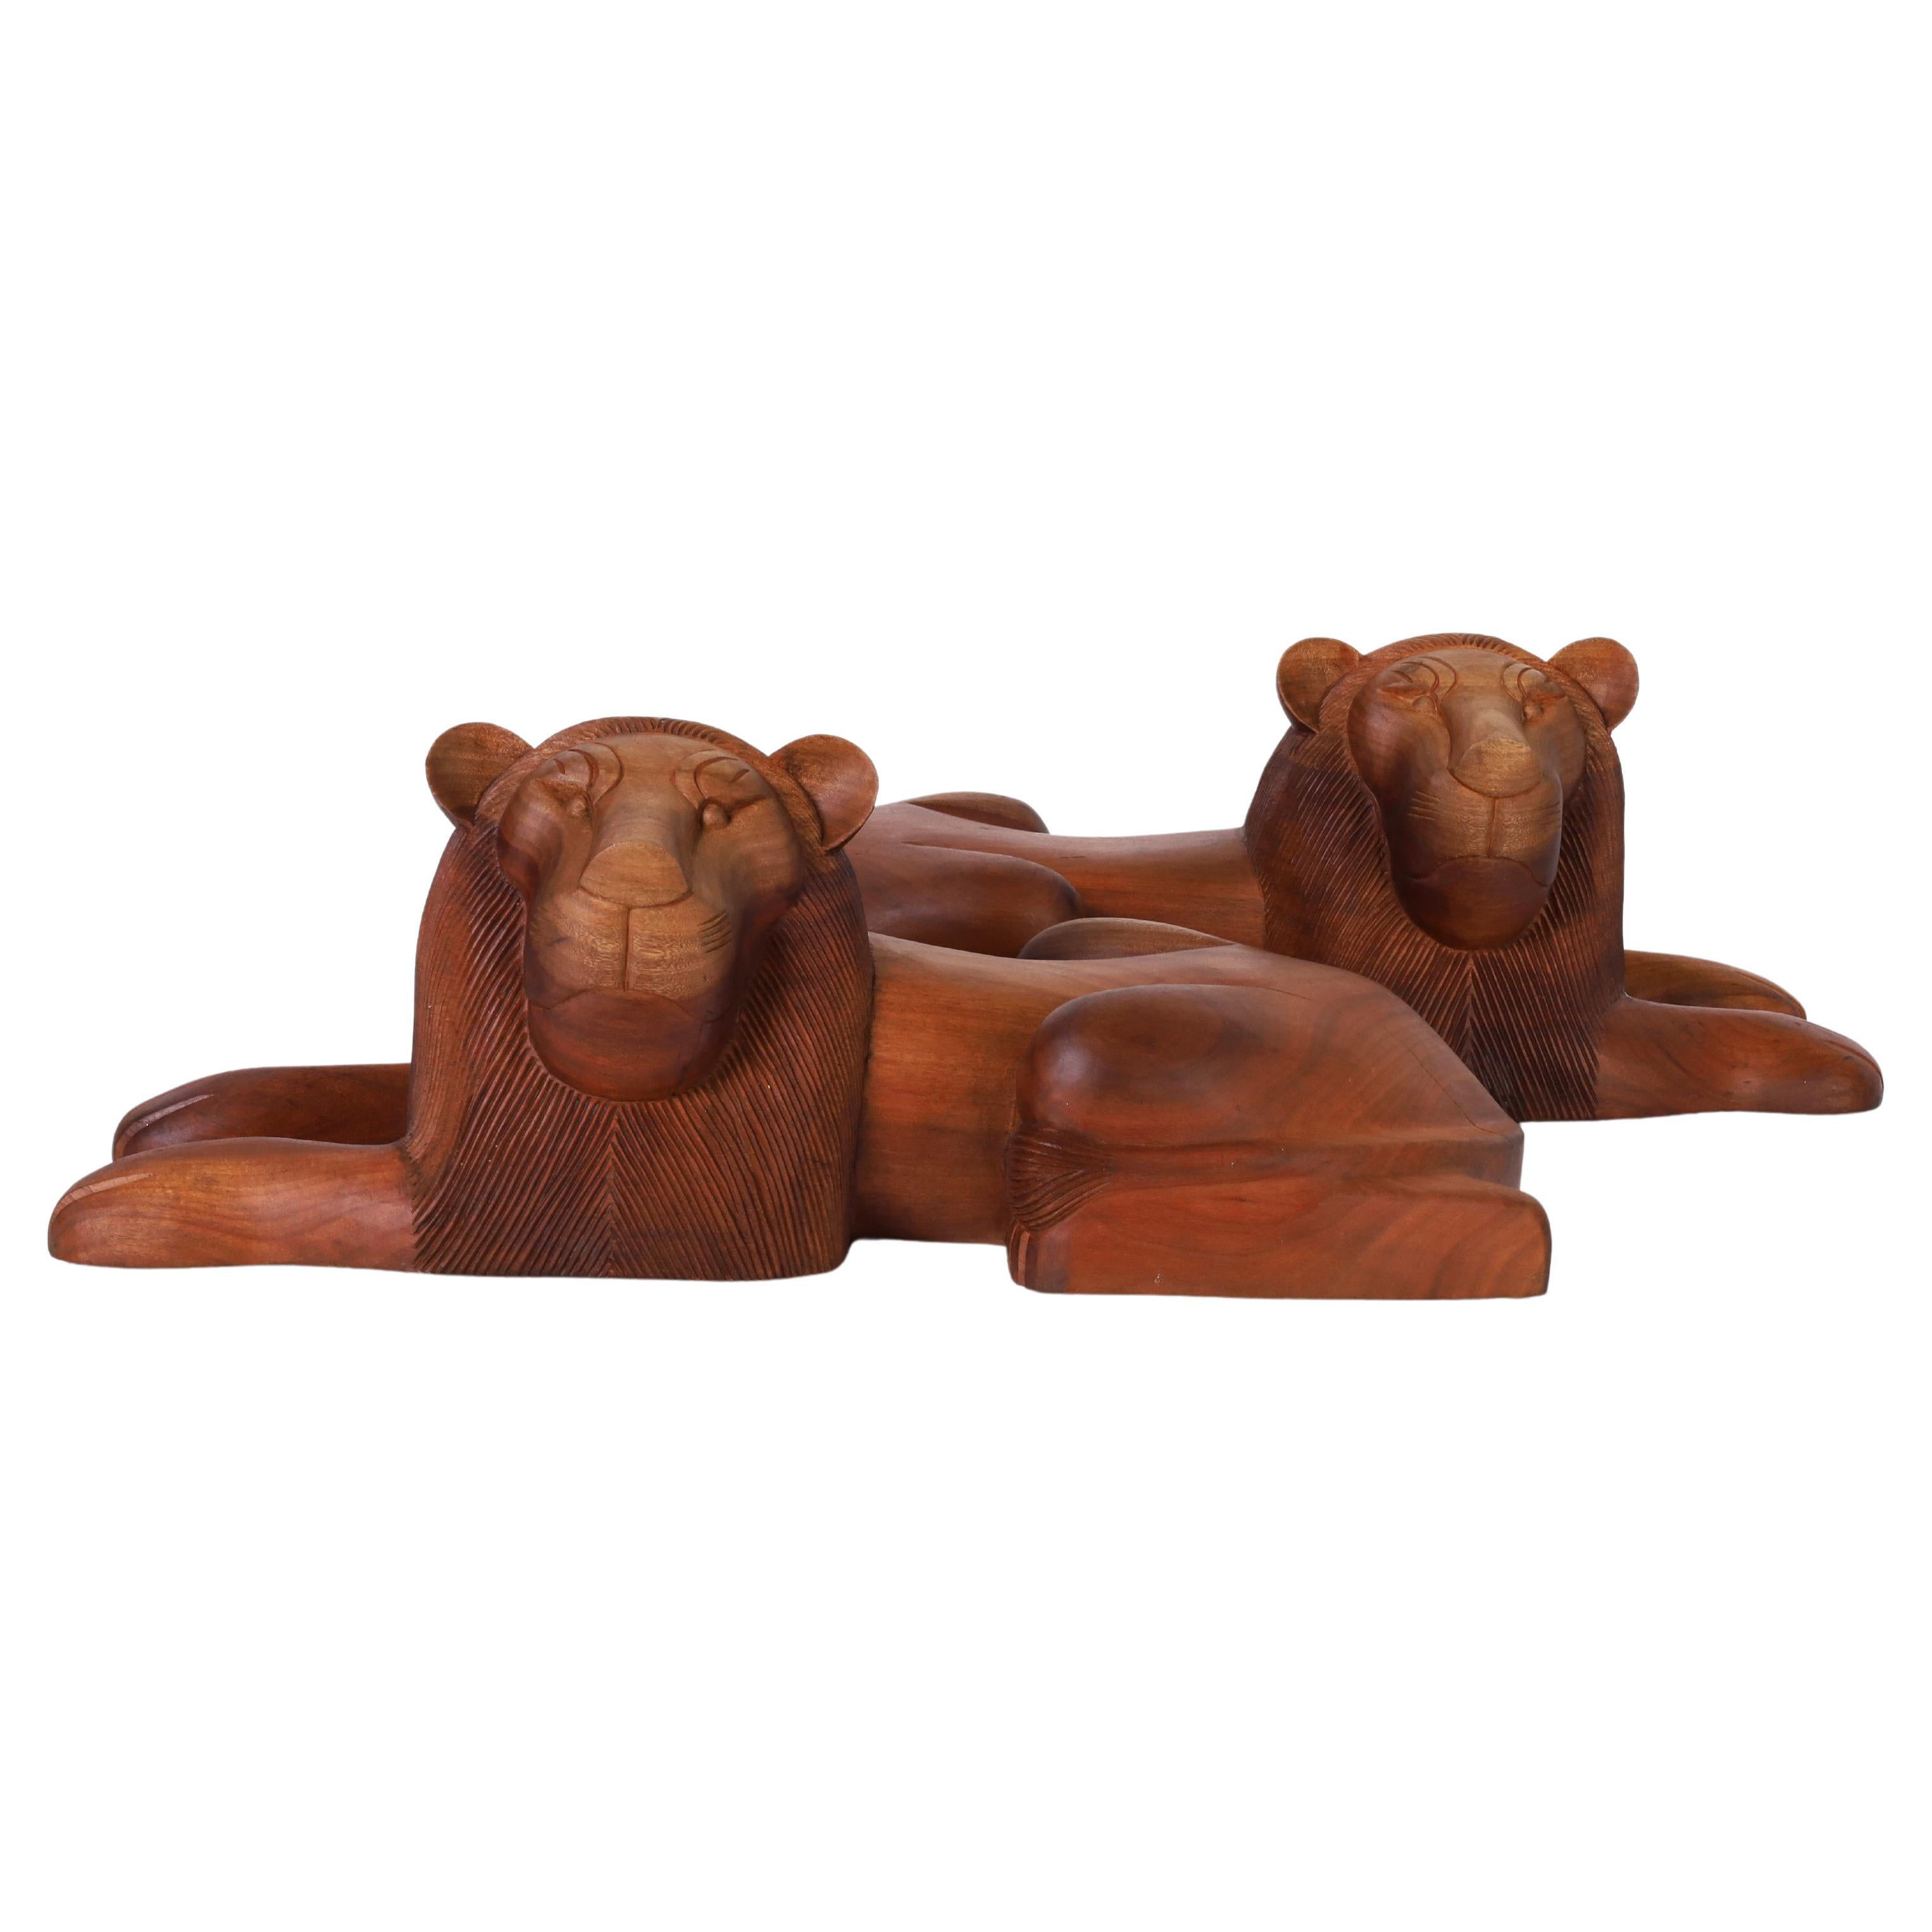 Pair of  Carved Wood Lions from  Minas Gerais